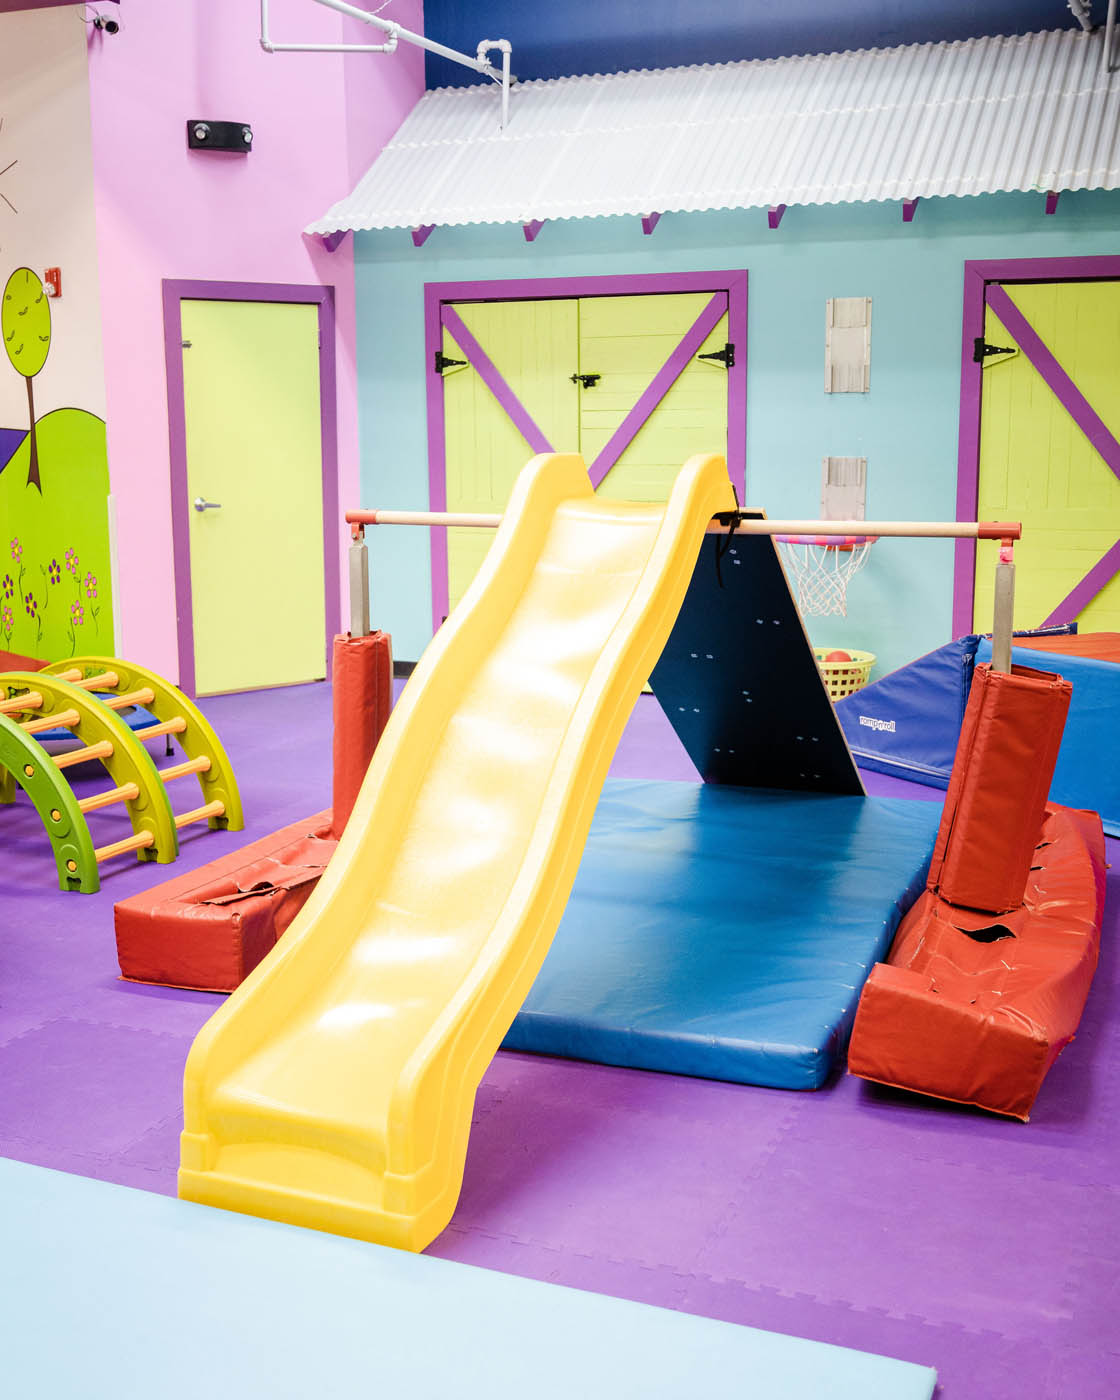 A Romp n' Roll slide, indoor playgrounds.